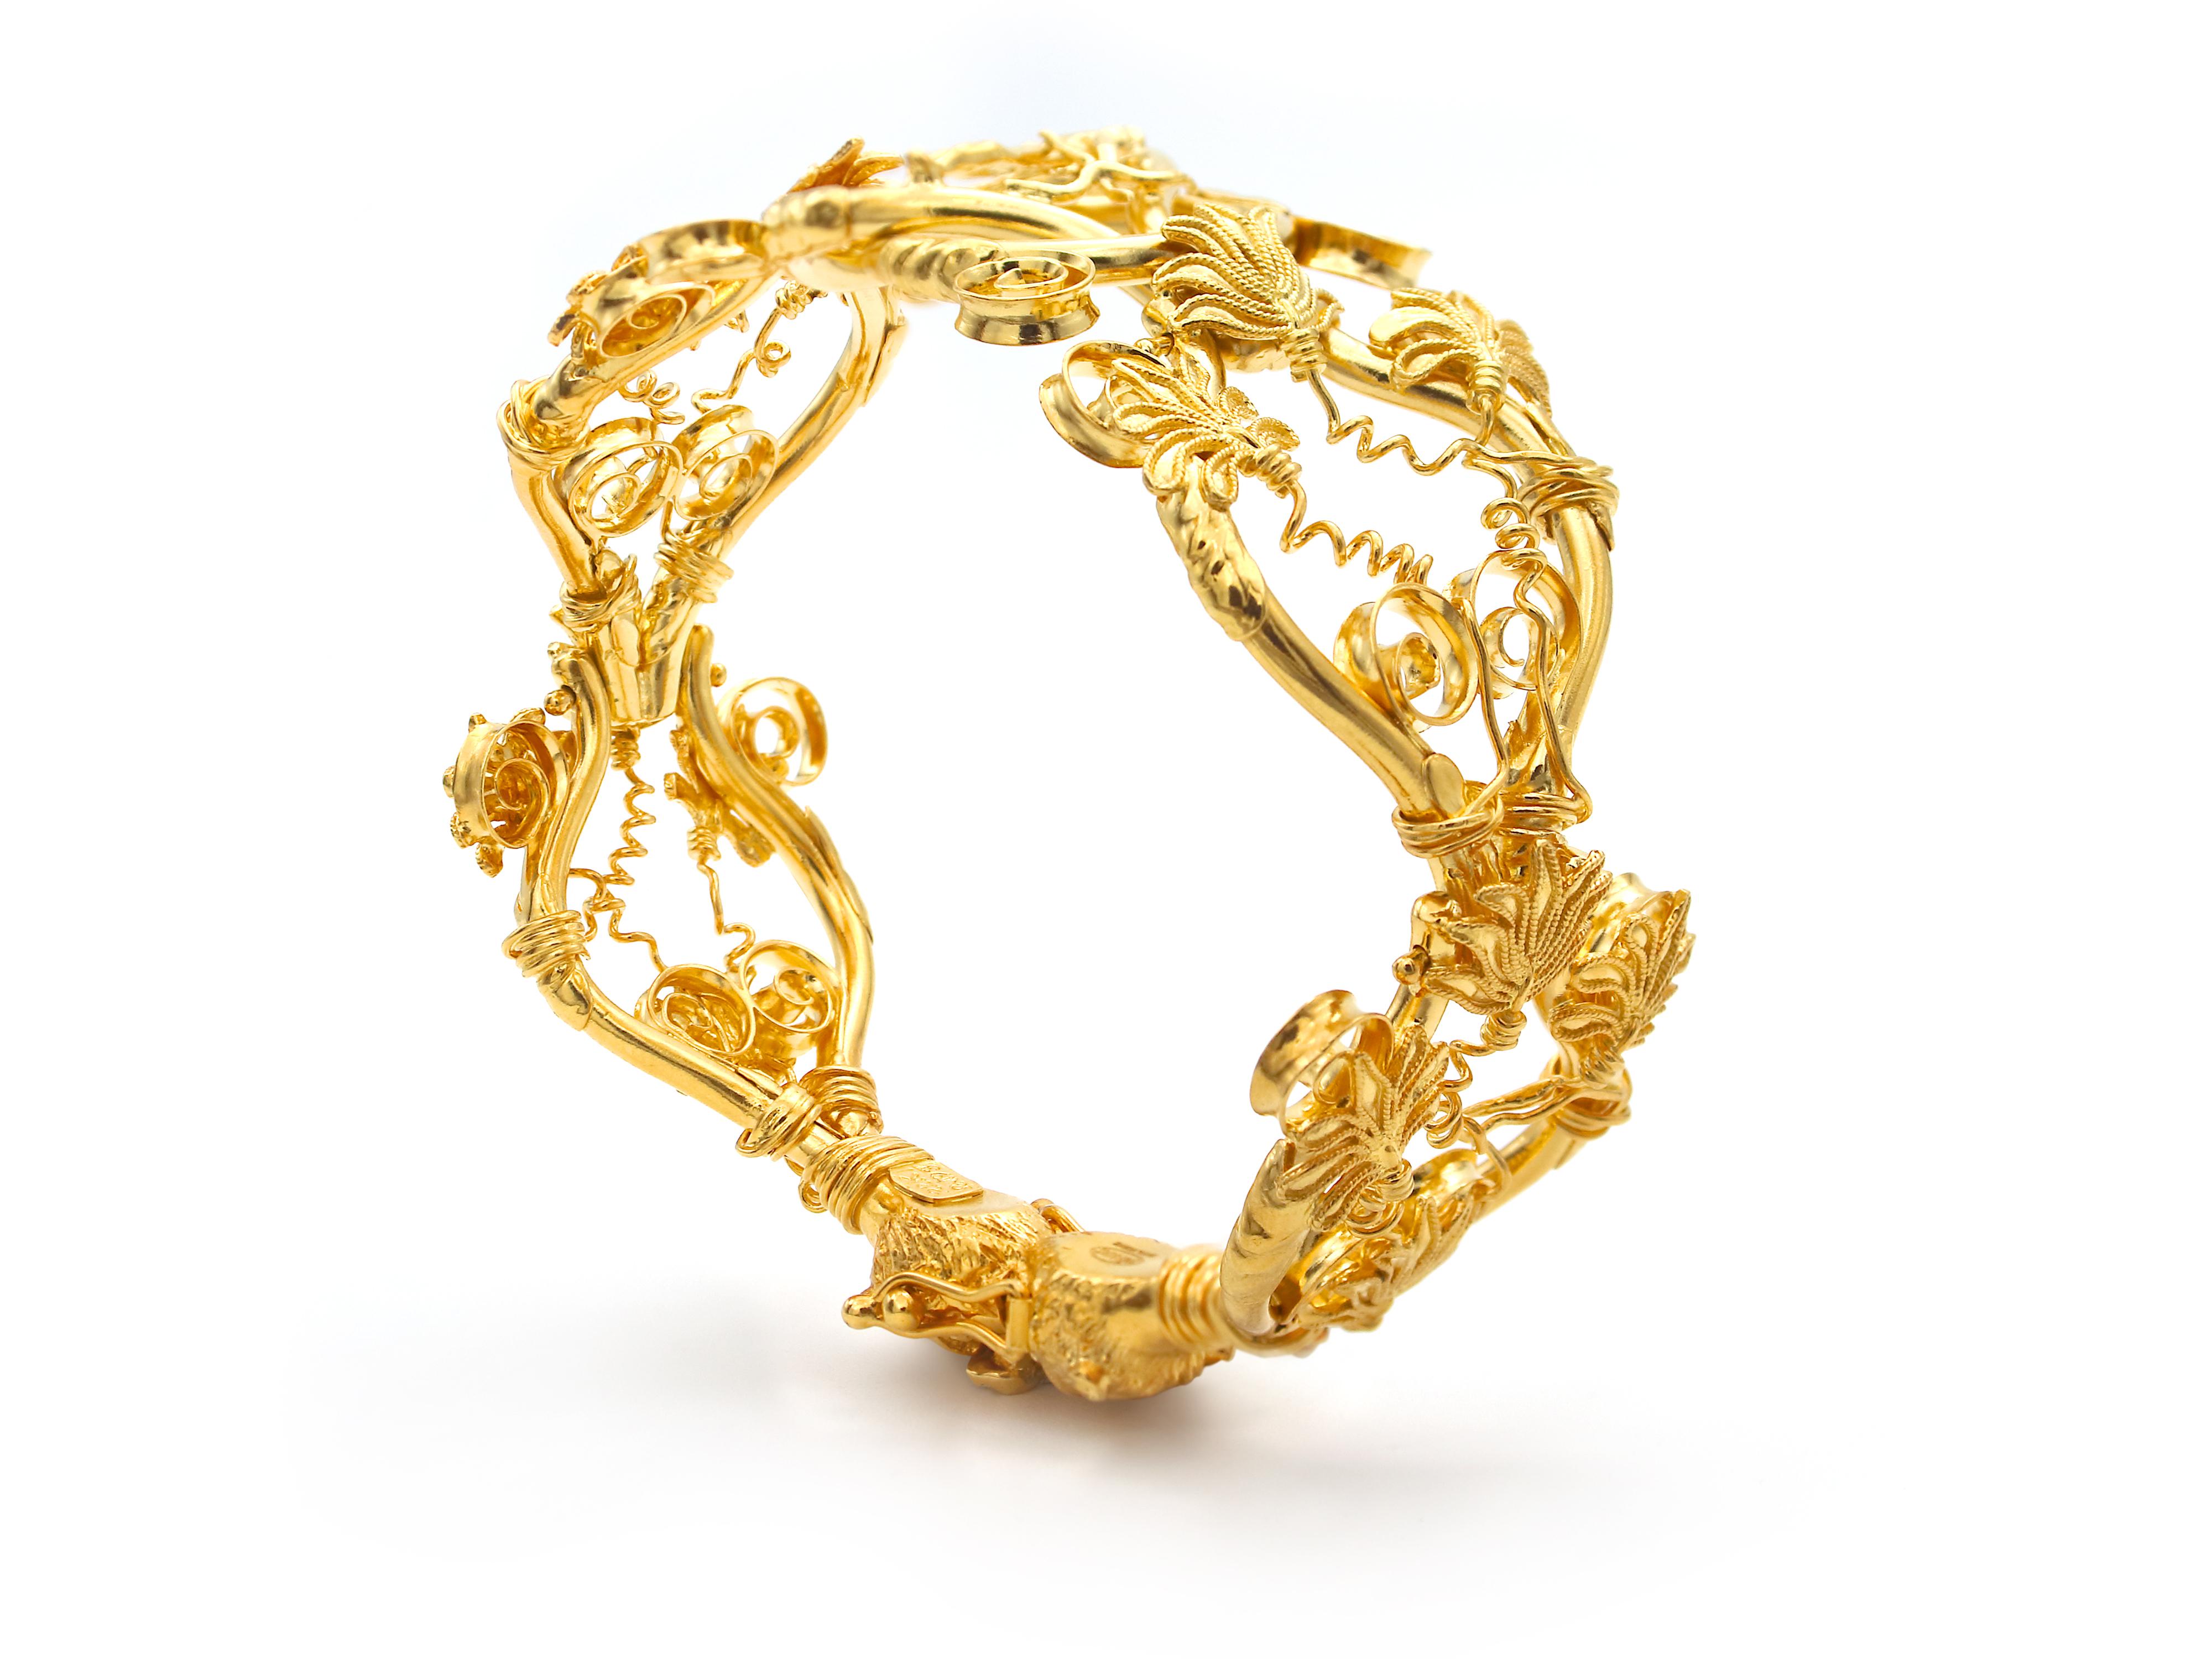 EROS (God of love) bracelet. Majestic bracelet set in 22 karats gold inspired from the original necklace of the mid-4th century BC found in the excavation at Macedonia area where was the Palace of King Philip King of the Macedonians and father of